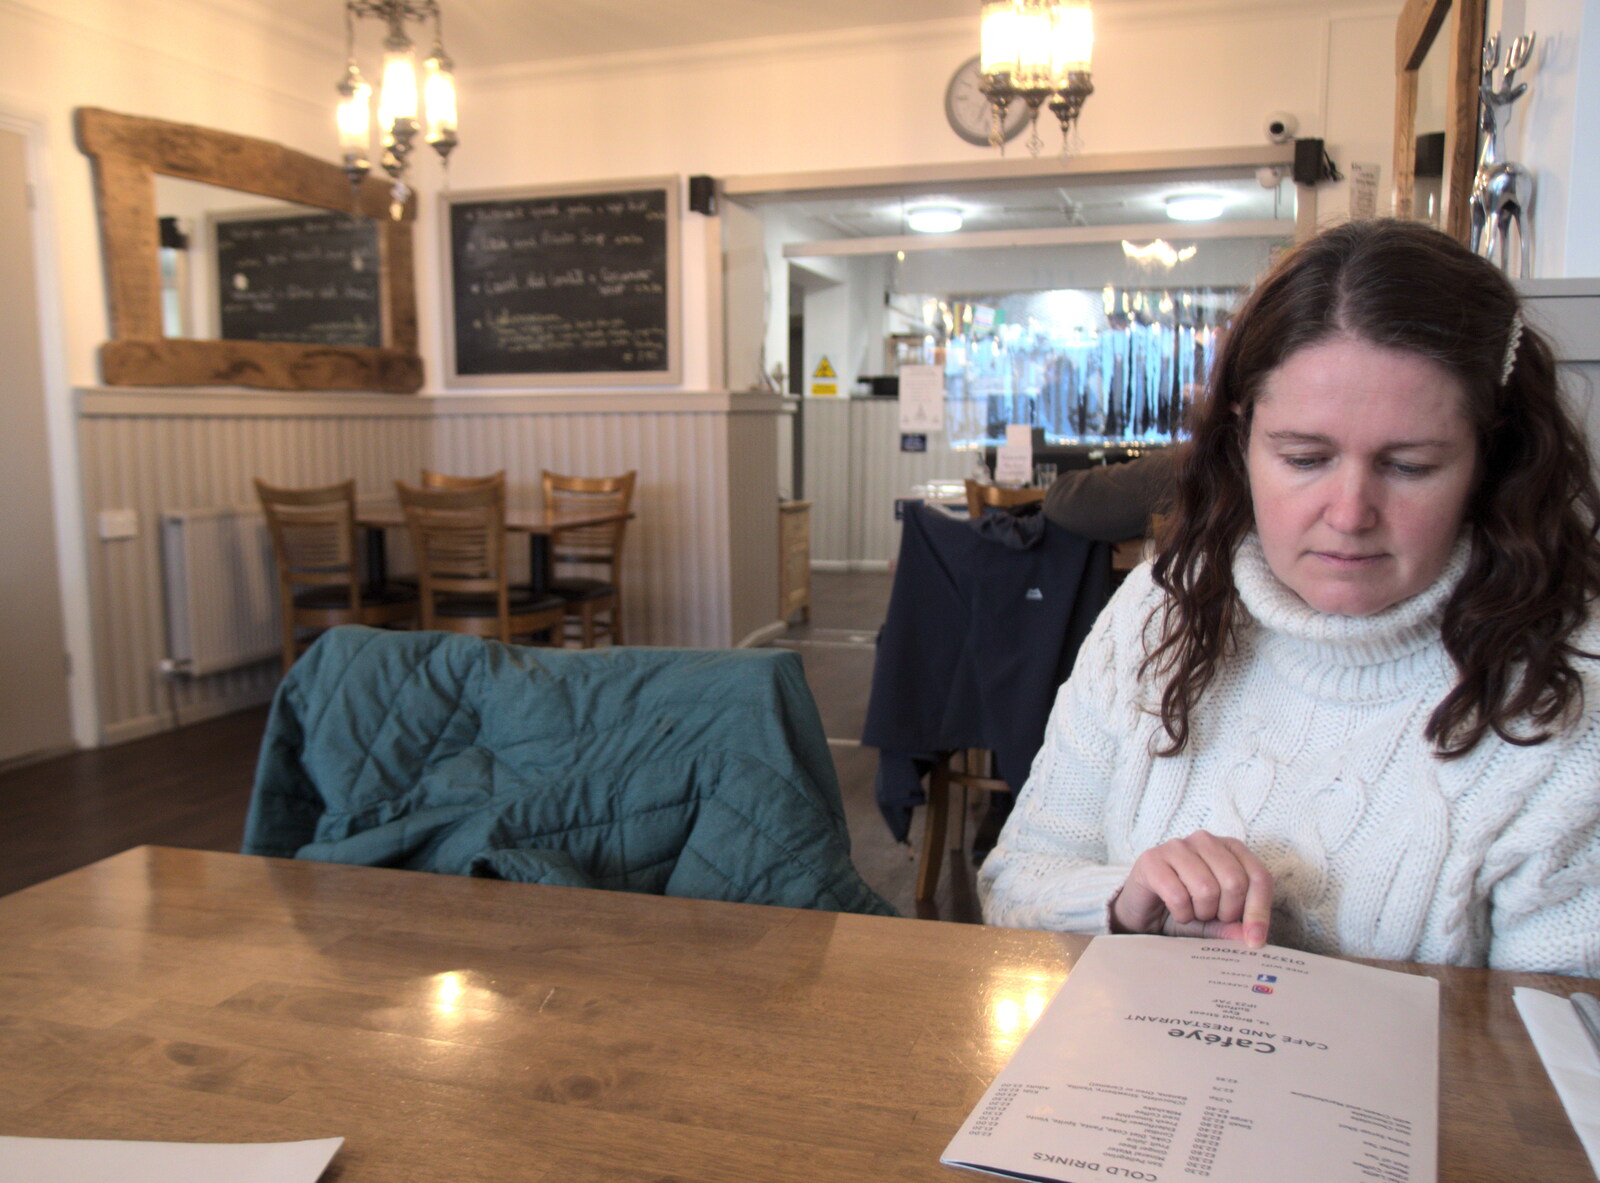 Isobel checks the menu in Caféye from A Virtual New Year's Eve, Brome, Suffolk - 31st December 2020